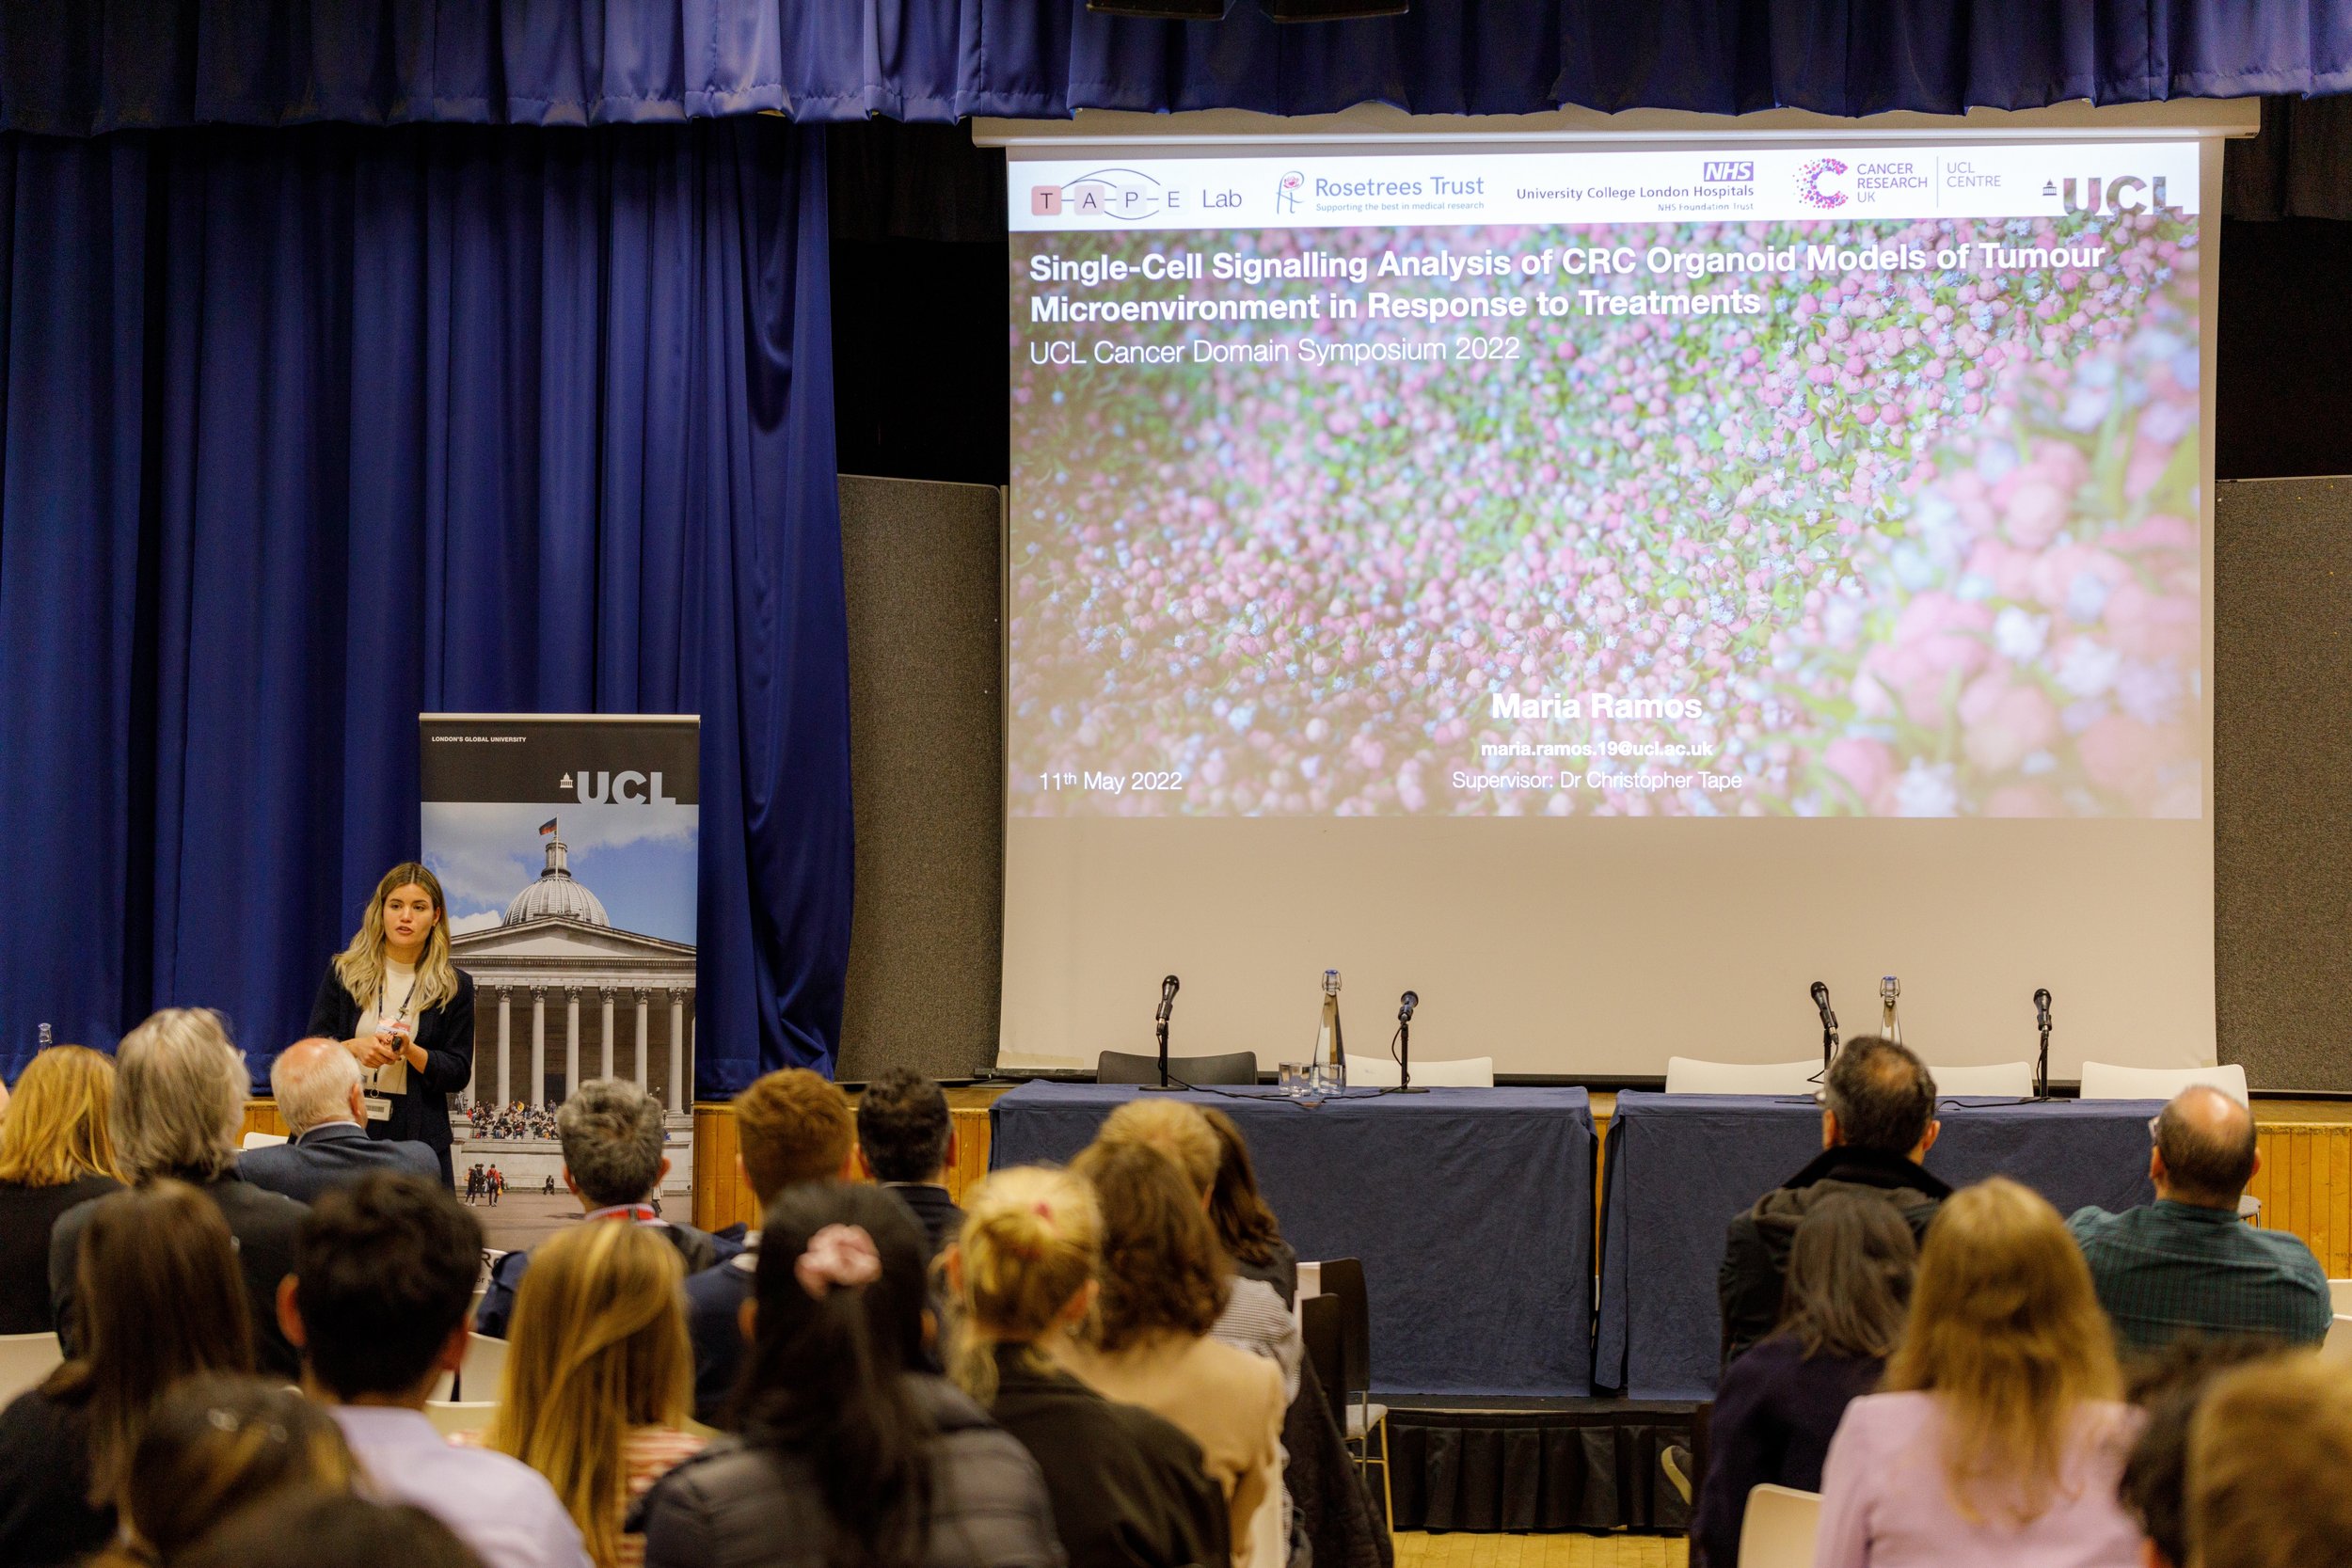  Maria speaking at the UCL Cancer Domain Symposium (May 2022) 